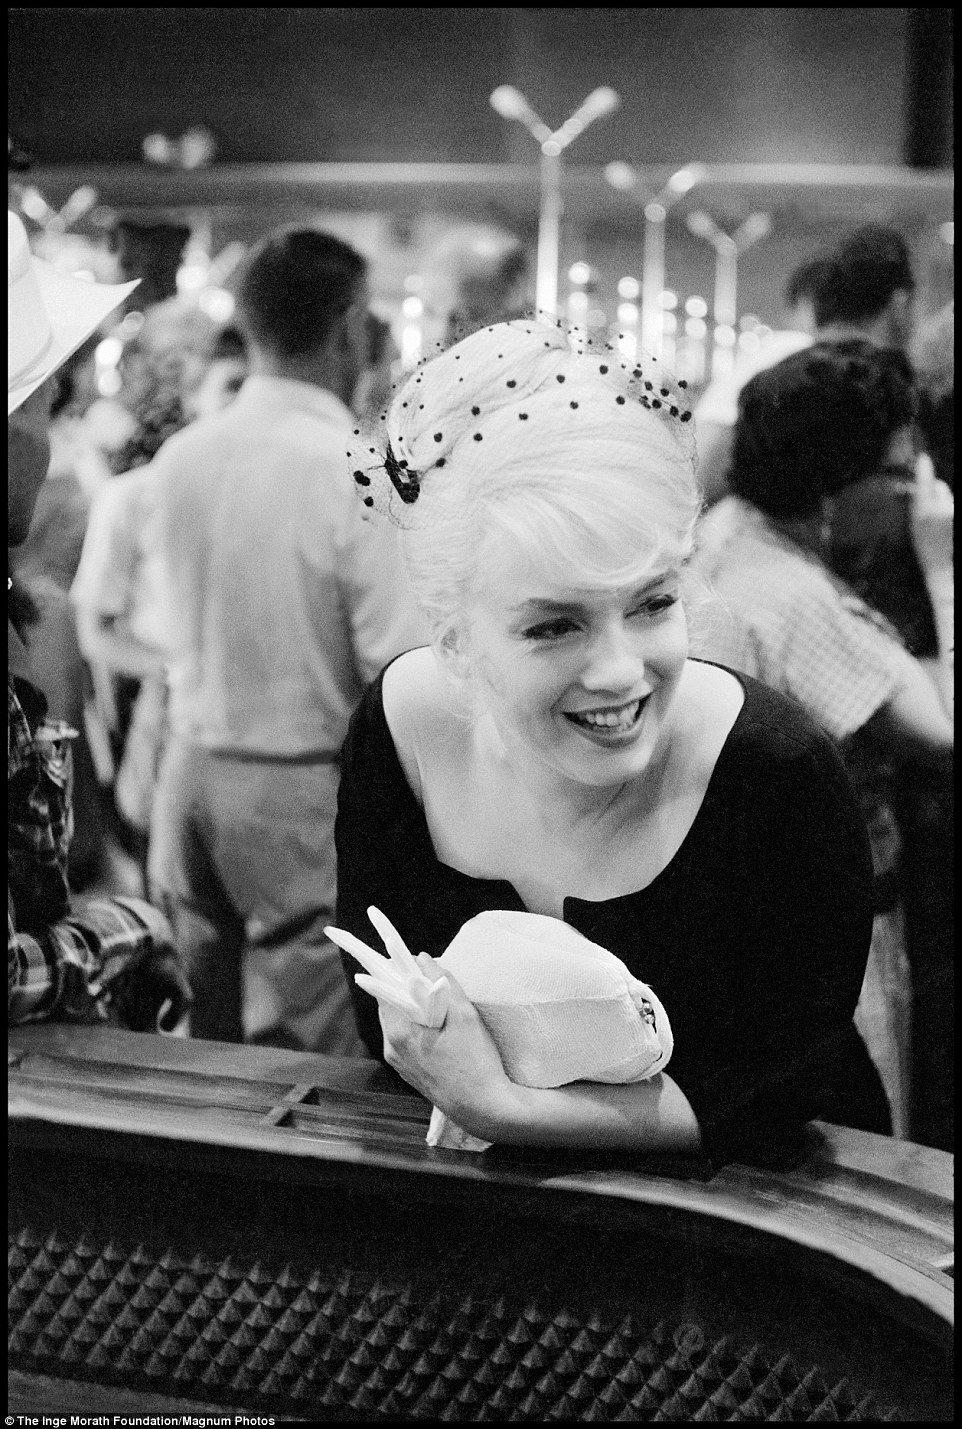 This intimate photo of Marilyn Monroe (on the set of The Misfits in 1960) is included in the new book Inge Morath: On Style, featuring some of the Austrian-born American photographer's best work from the era